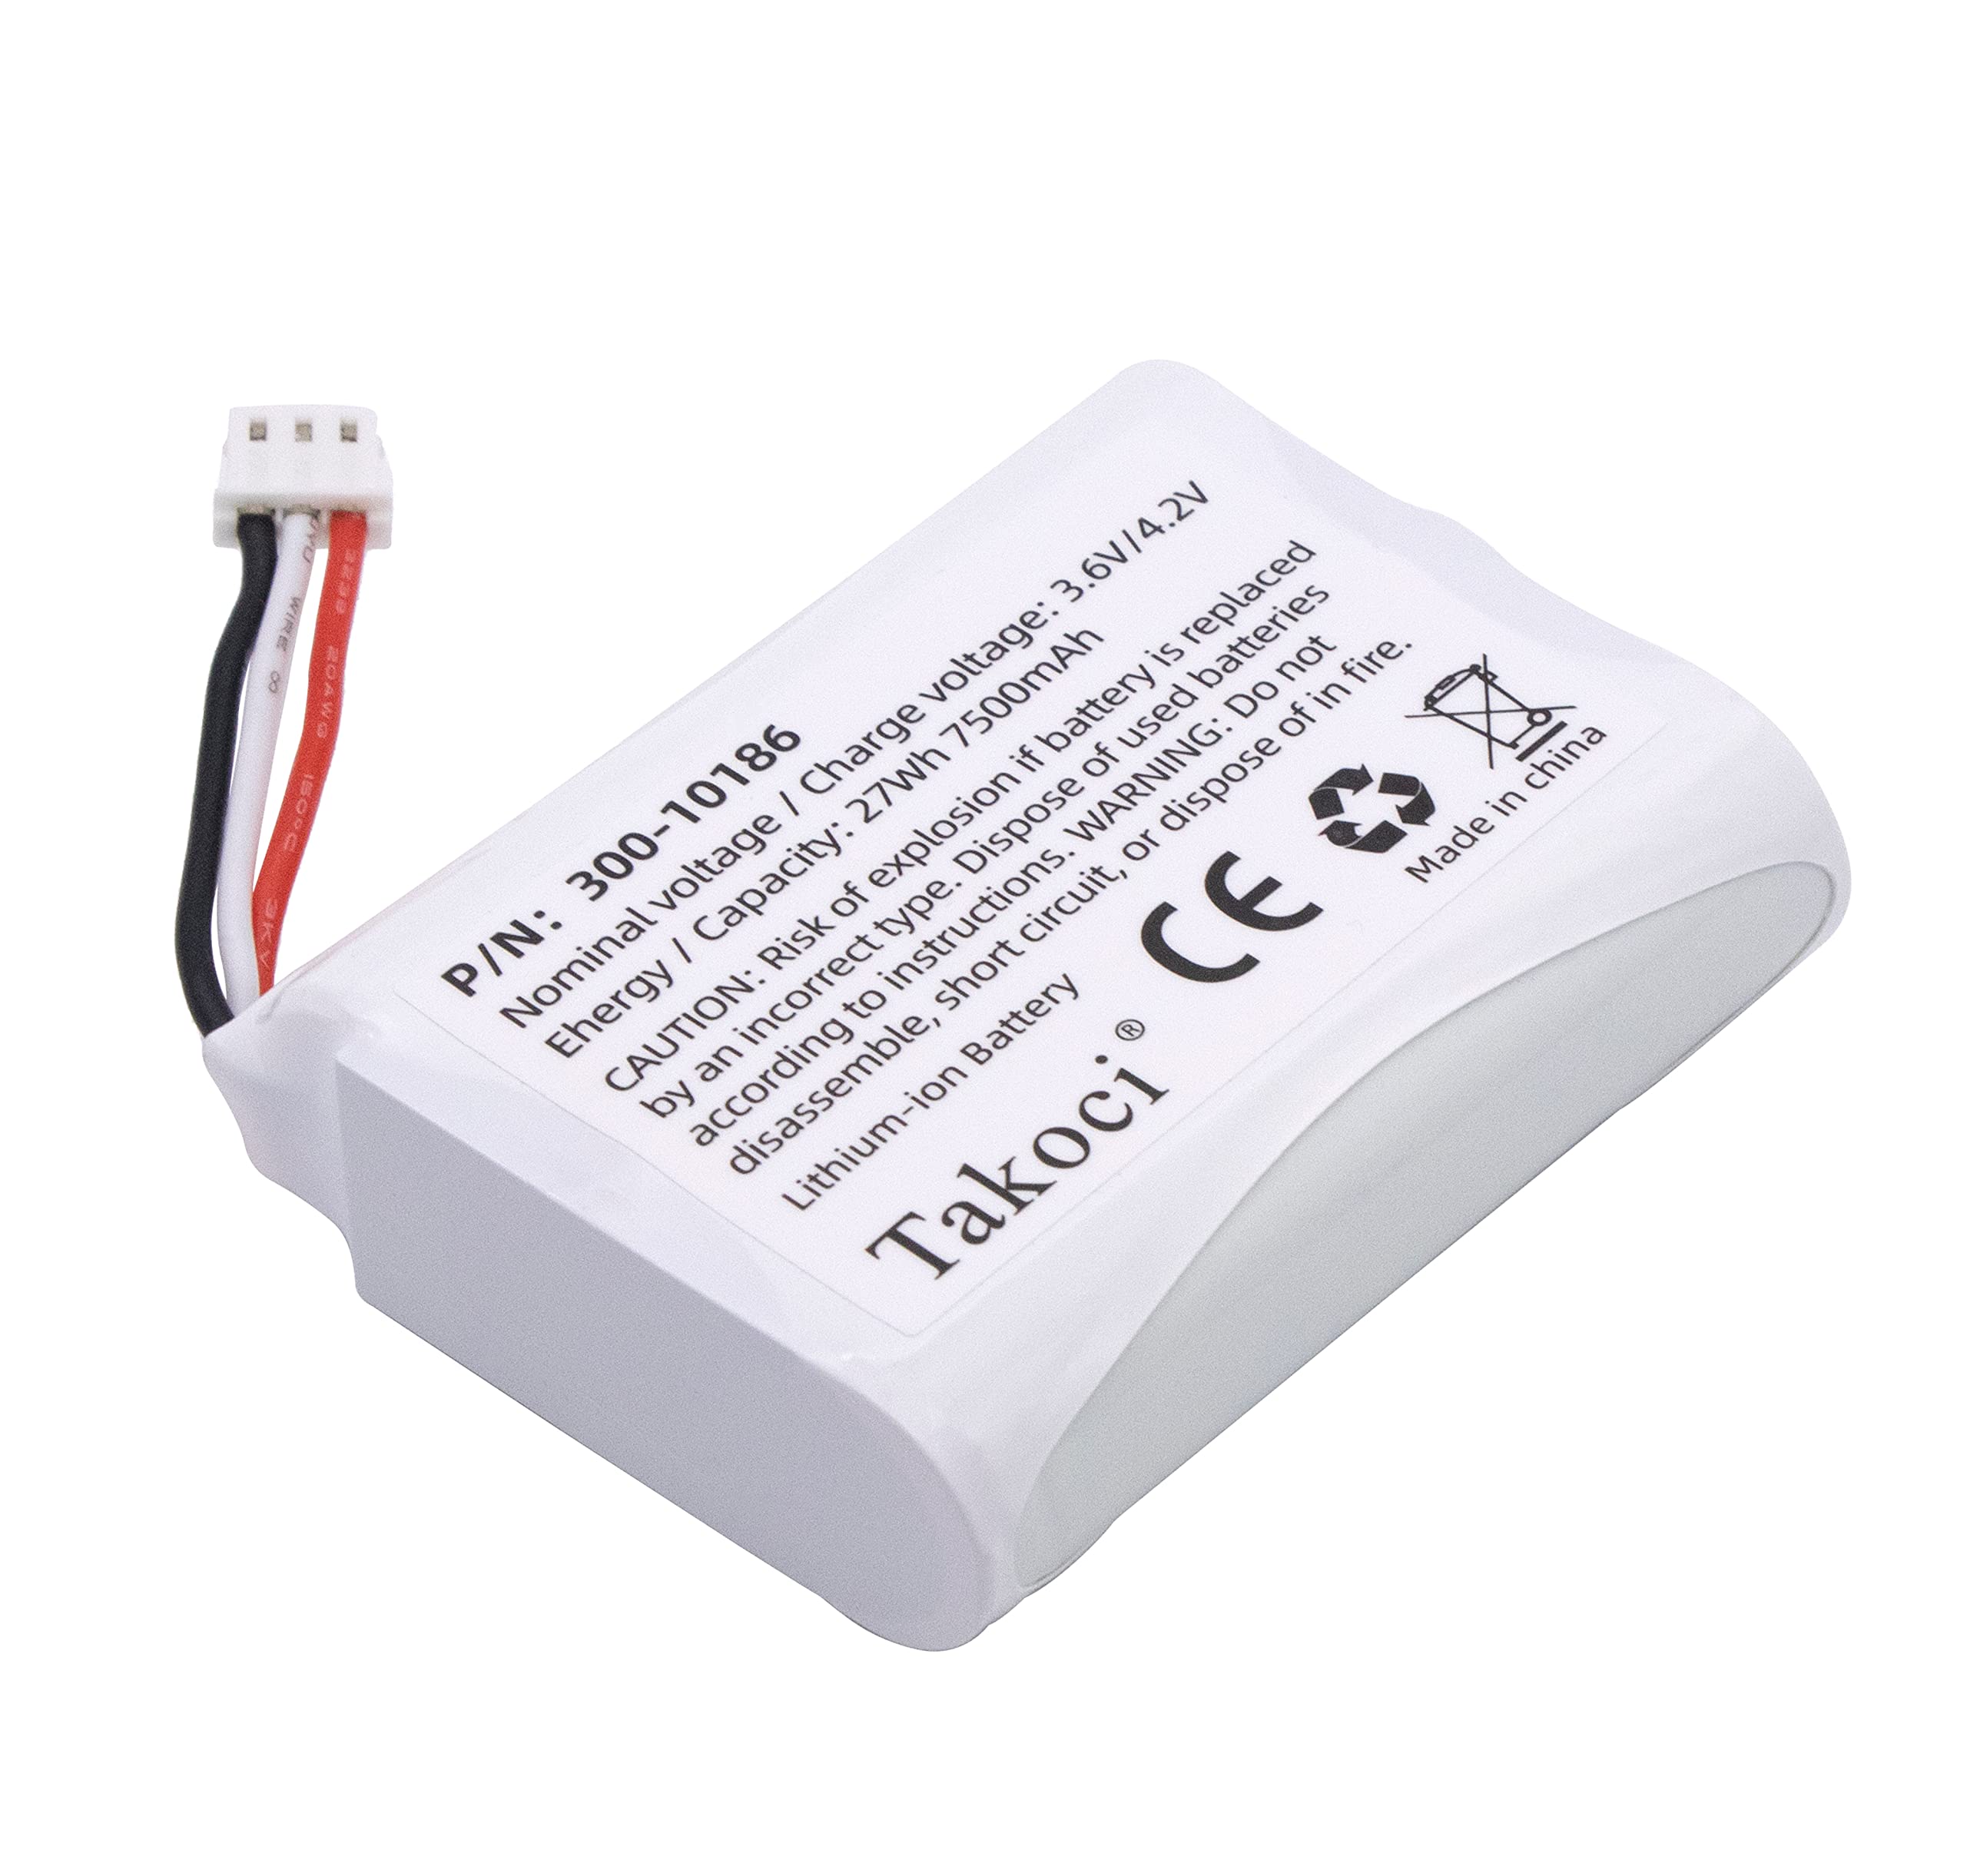 TAKOCI Replacement Battery 300-10186 for ADT Command Smart Security Panel 7500mah 3.6V 27Wh